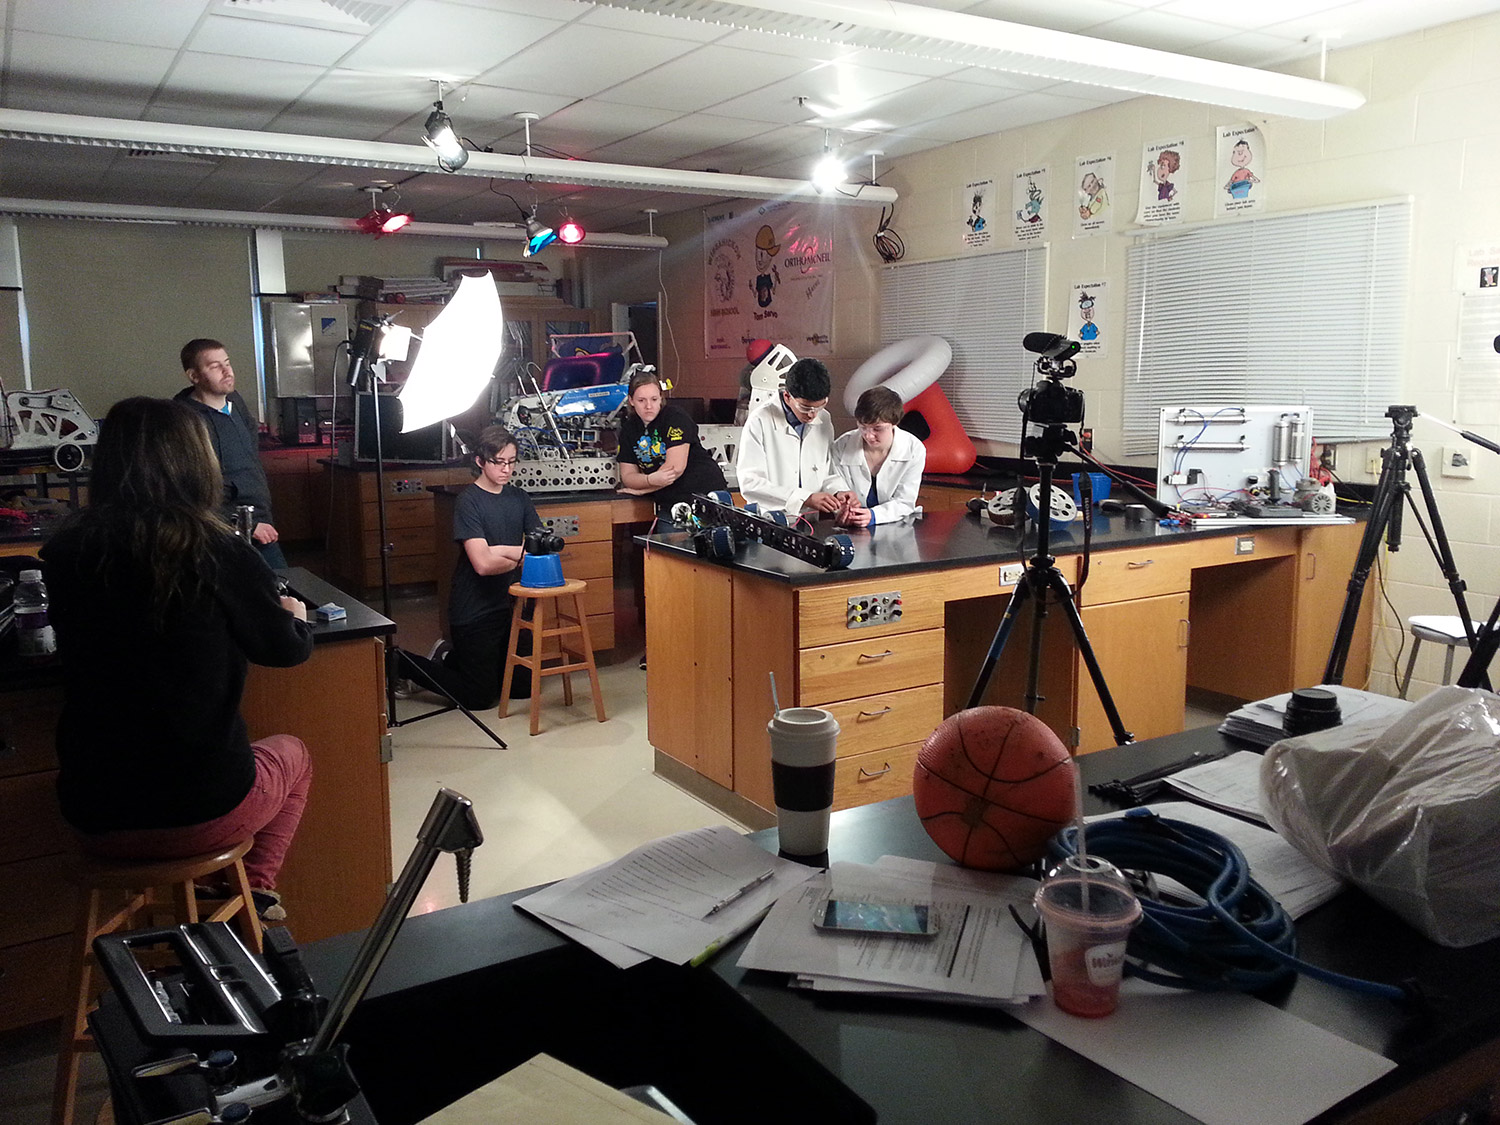 Behind-the-scenes at the setup for the electric motors video.